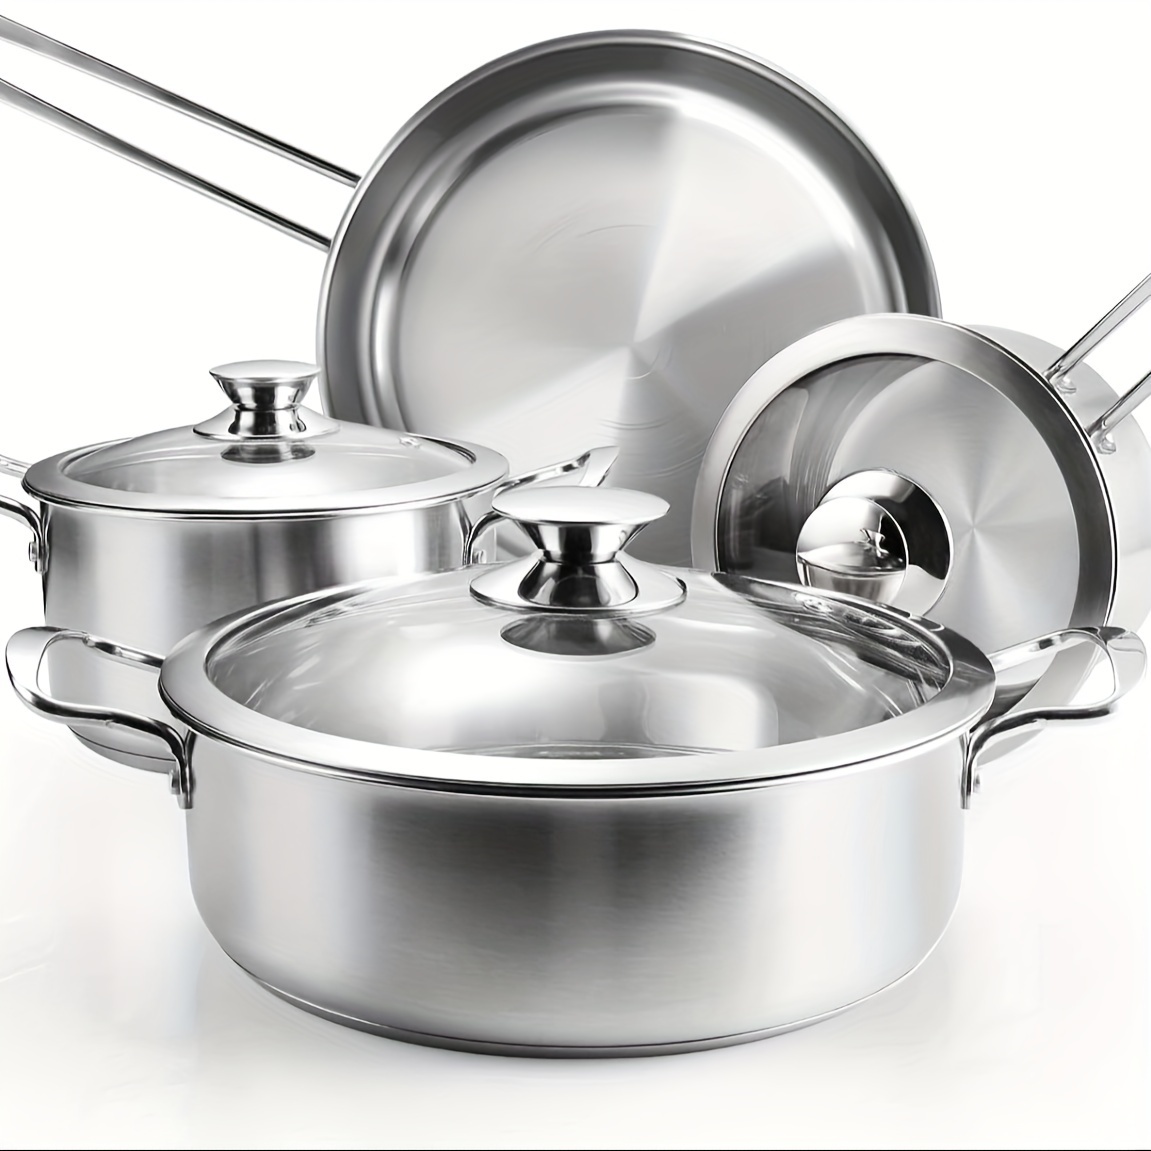 

Stainless Steel Pots And Pans Set, 7-piece Kitchen Cookware Sets With Glass Lids, Stay-cool Handle, Oven Safe, Works With Induction/electric And Gas Cooktops, Dishwasher